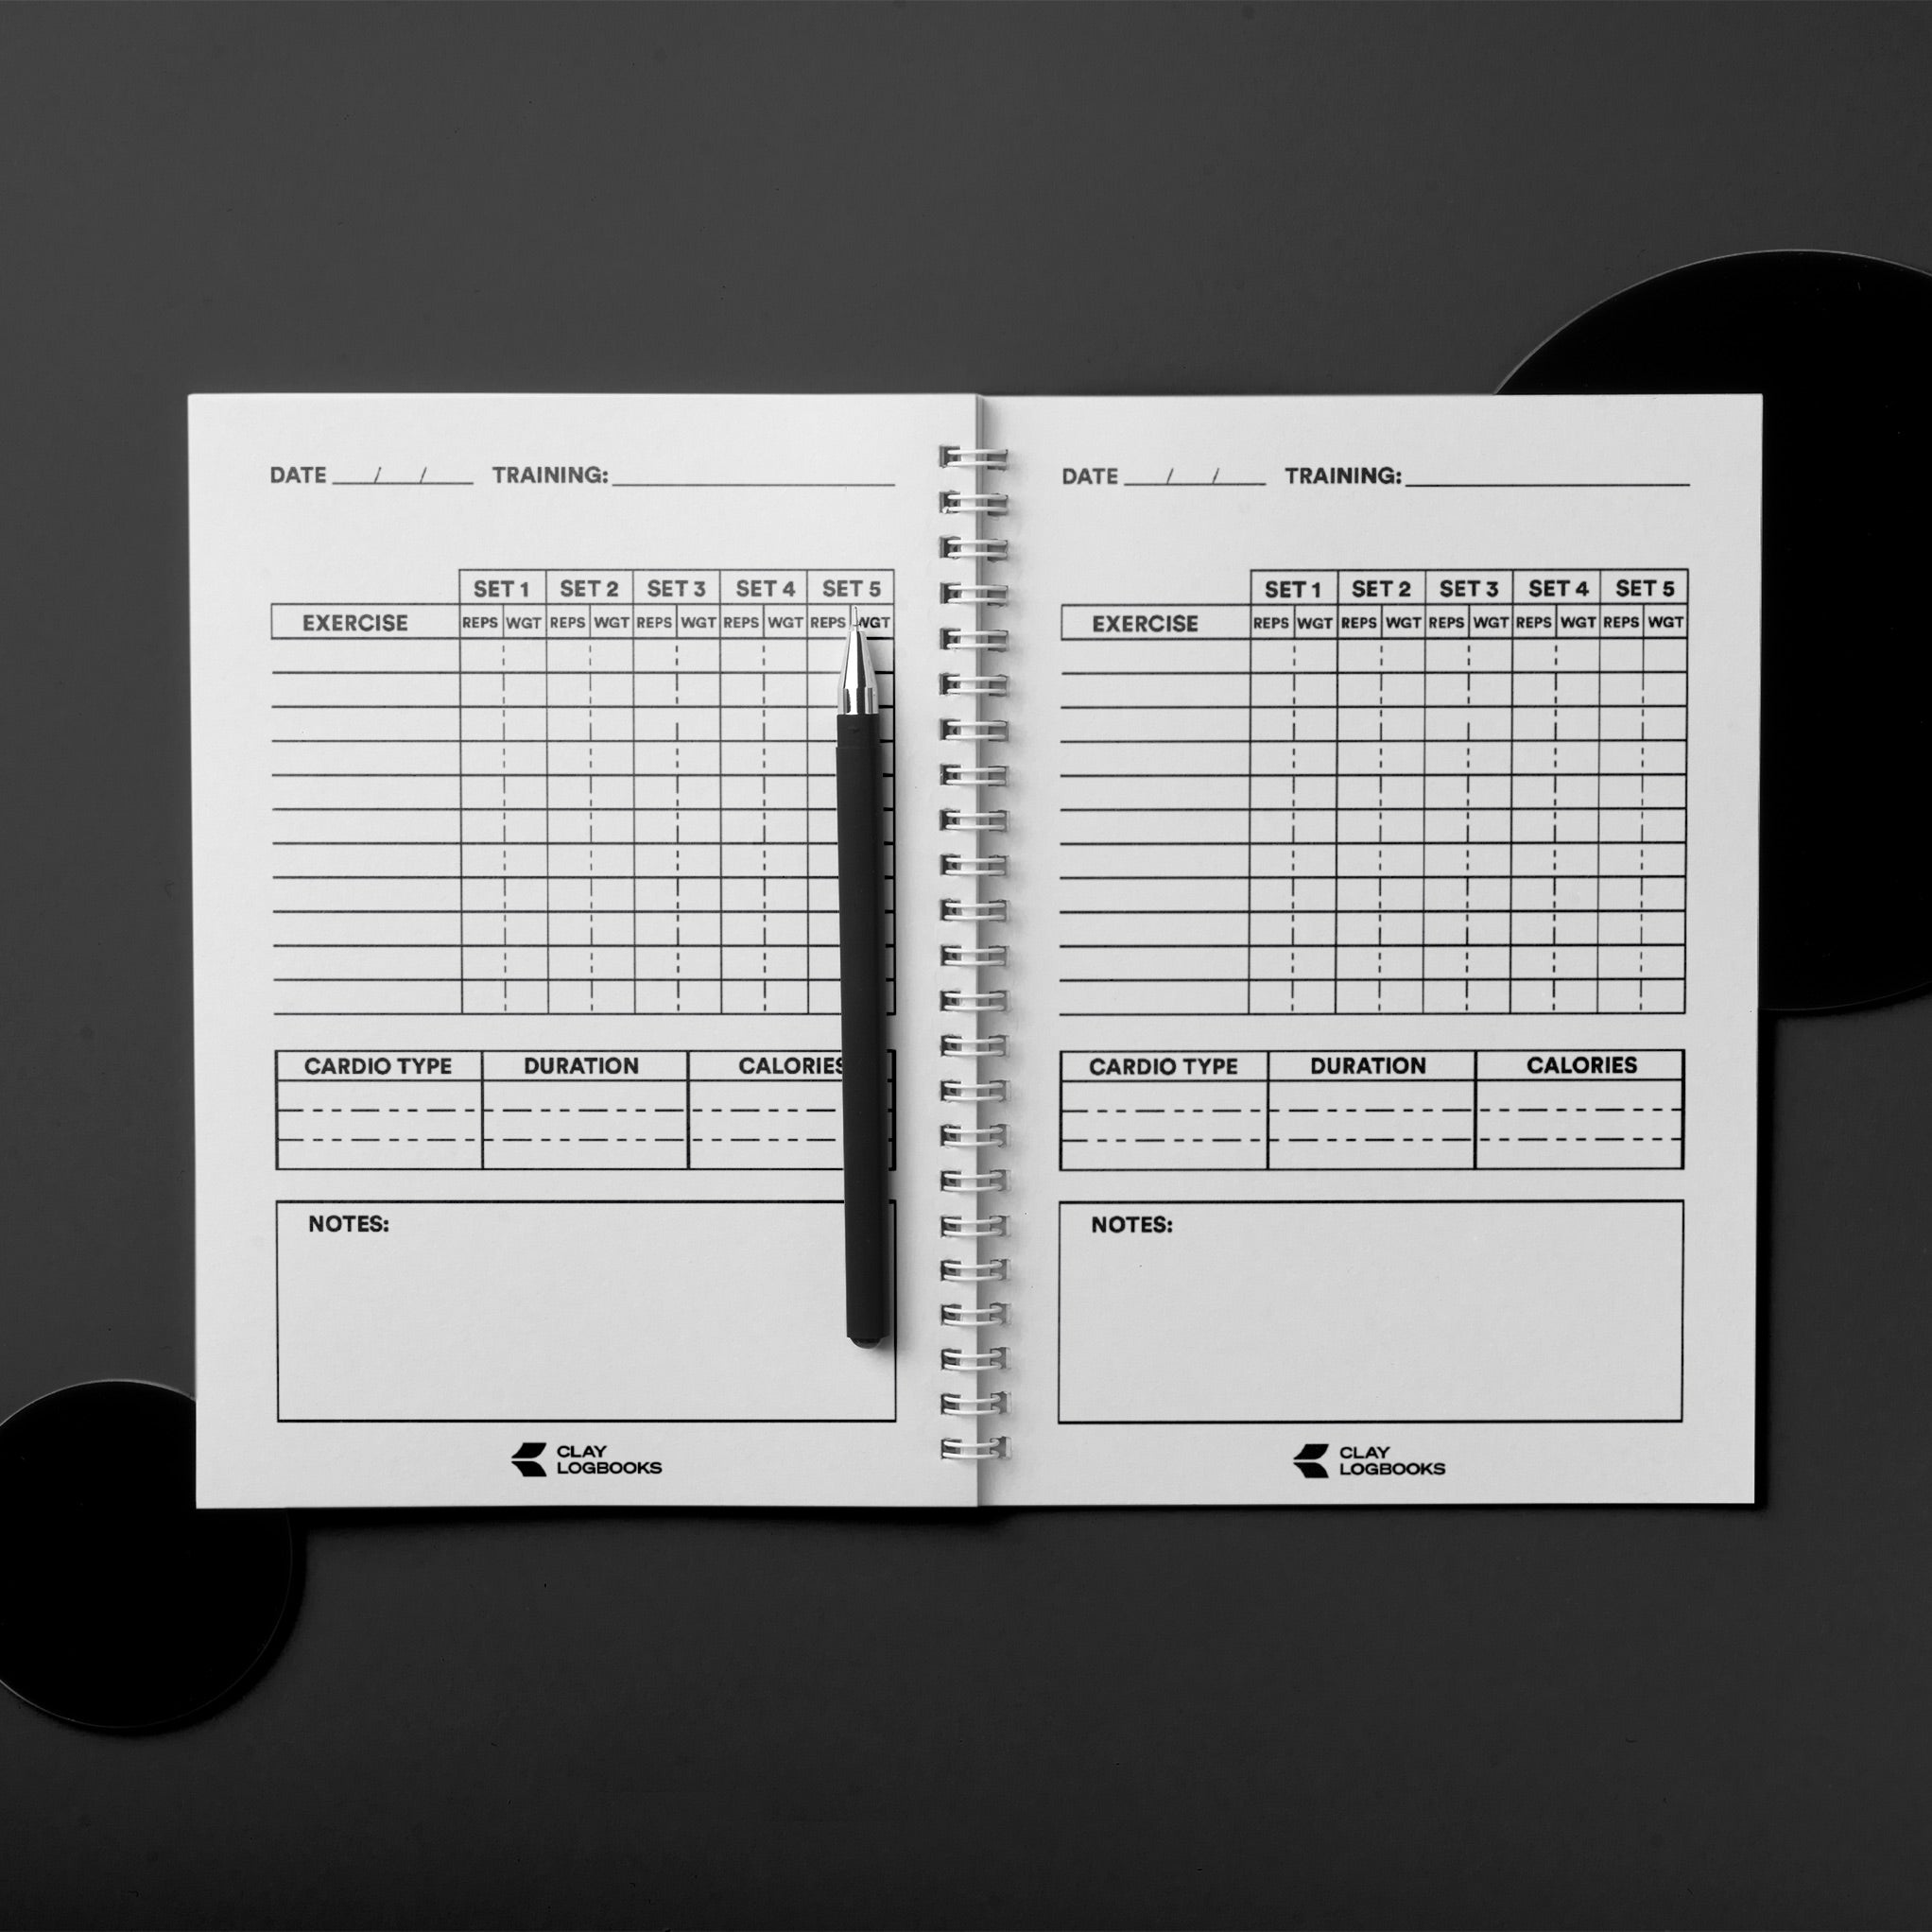 Internal tracking pages, showing the main layout of the logbook.